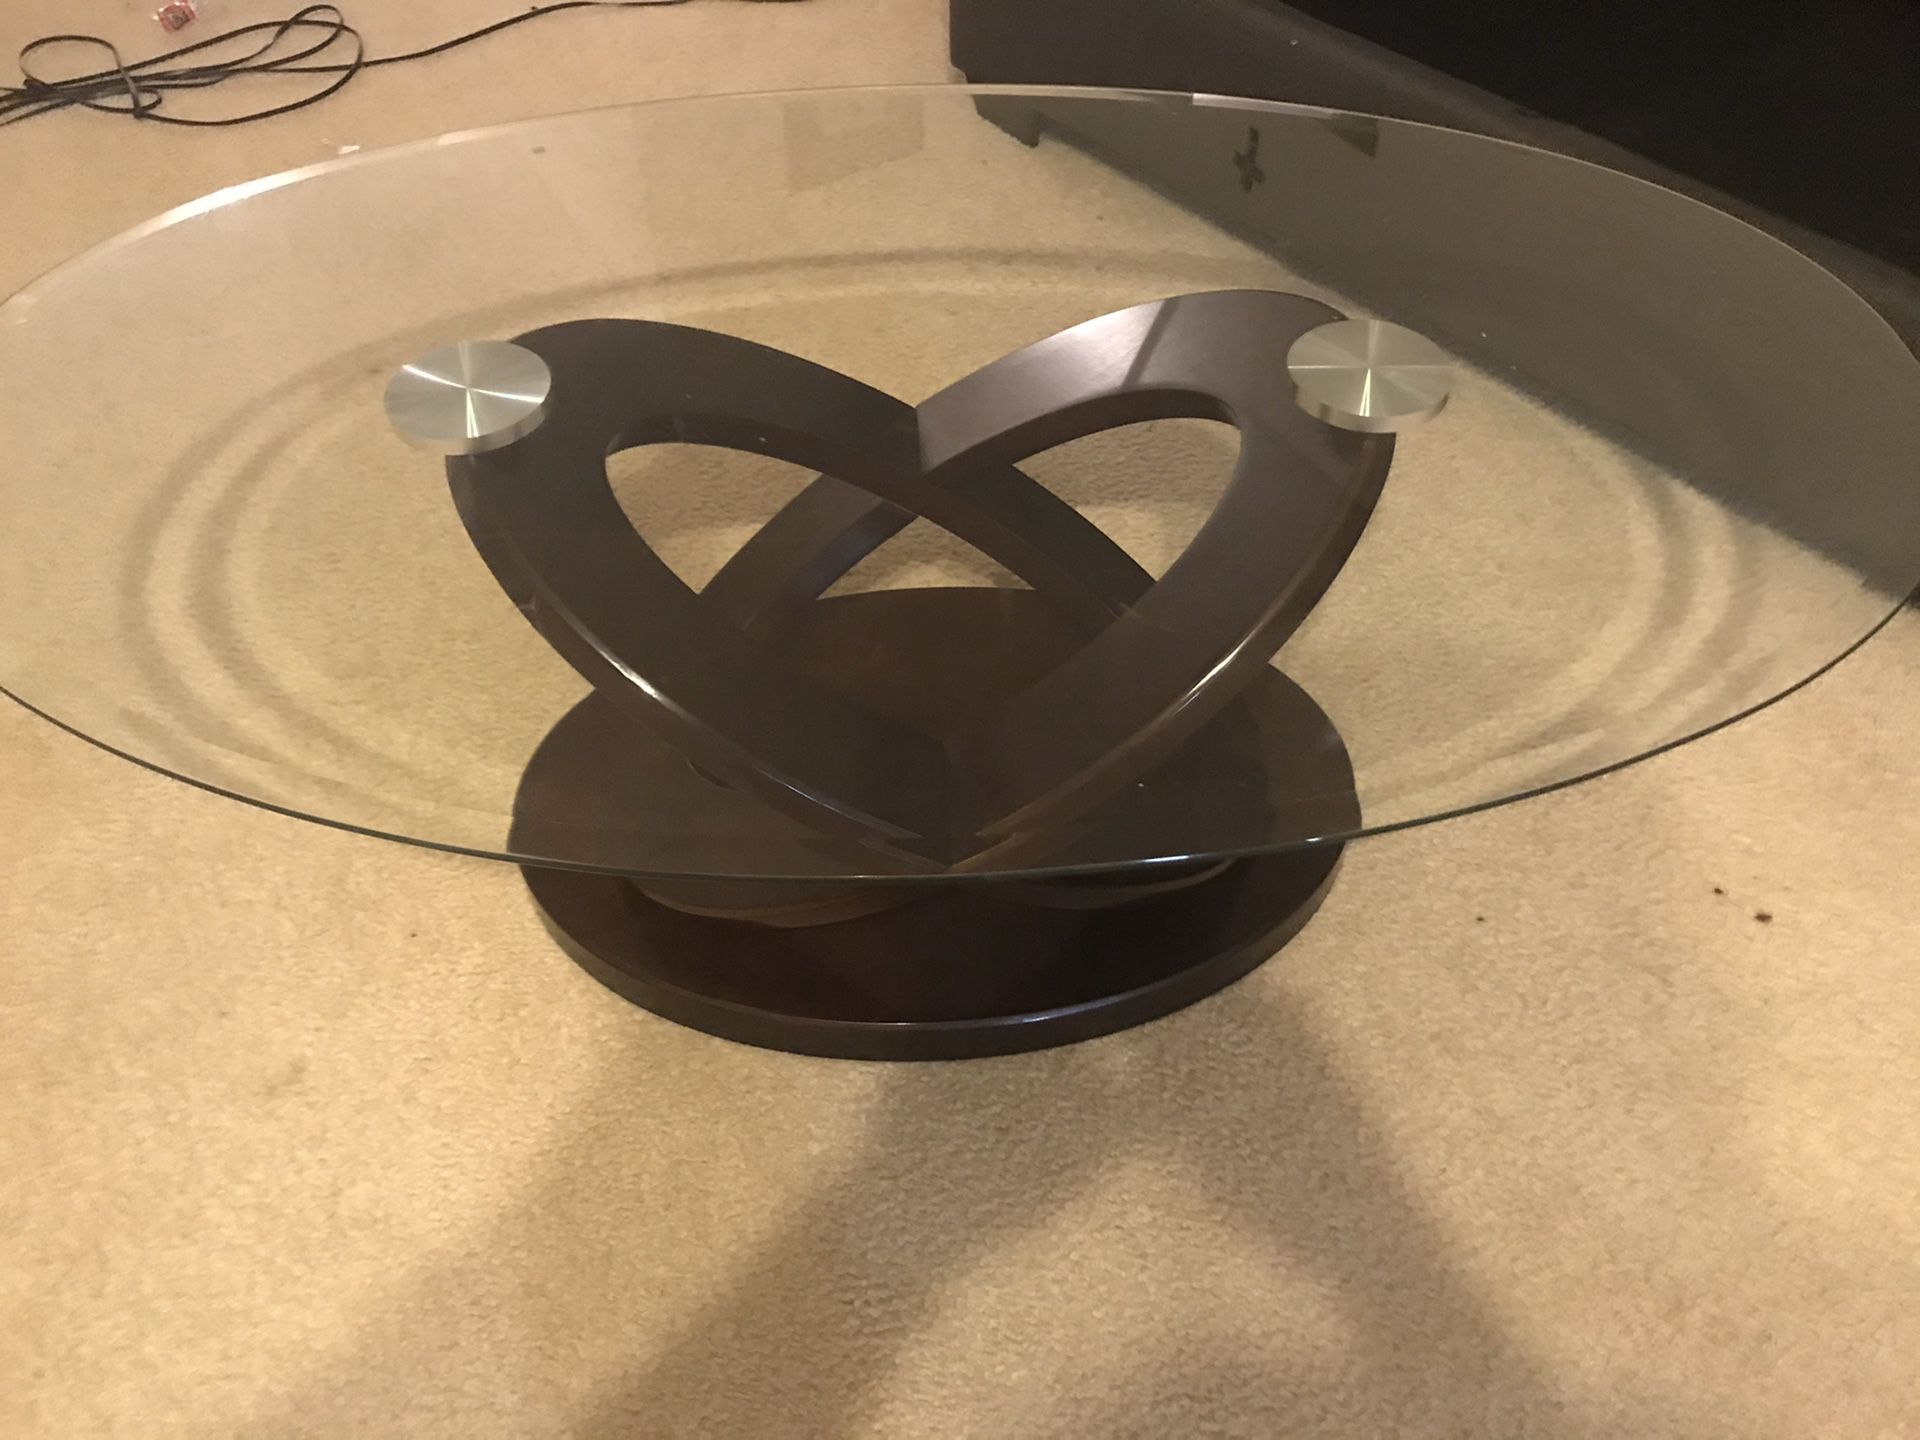 Glass center table